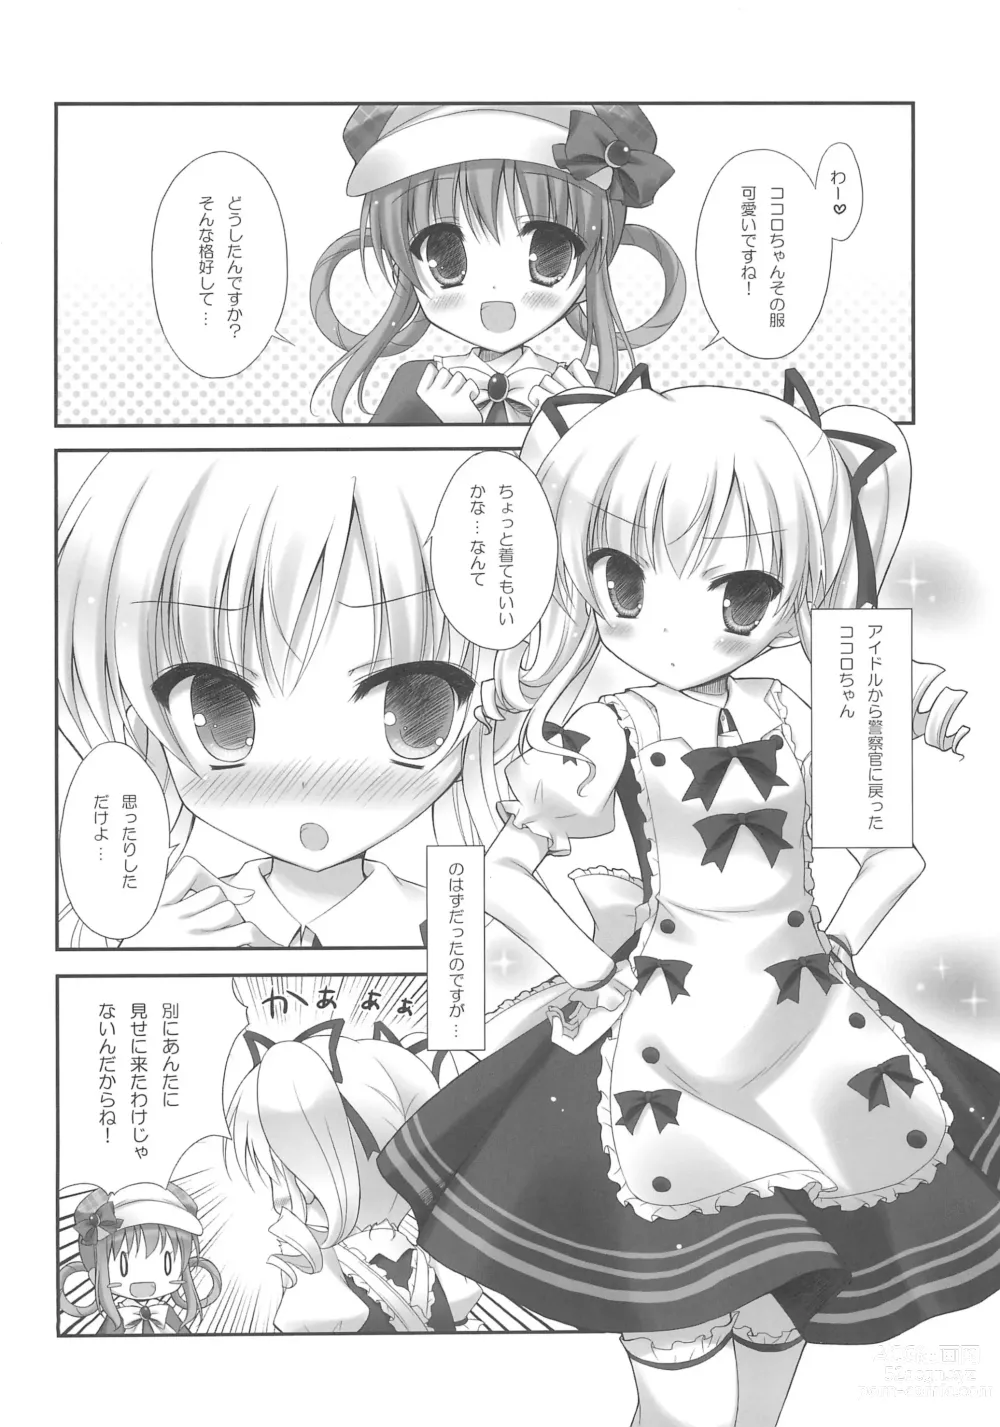 Page 6 of doujinshi Milky Time*